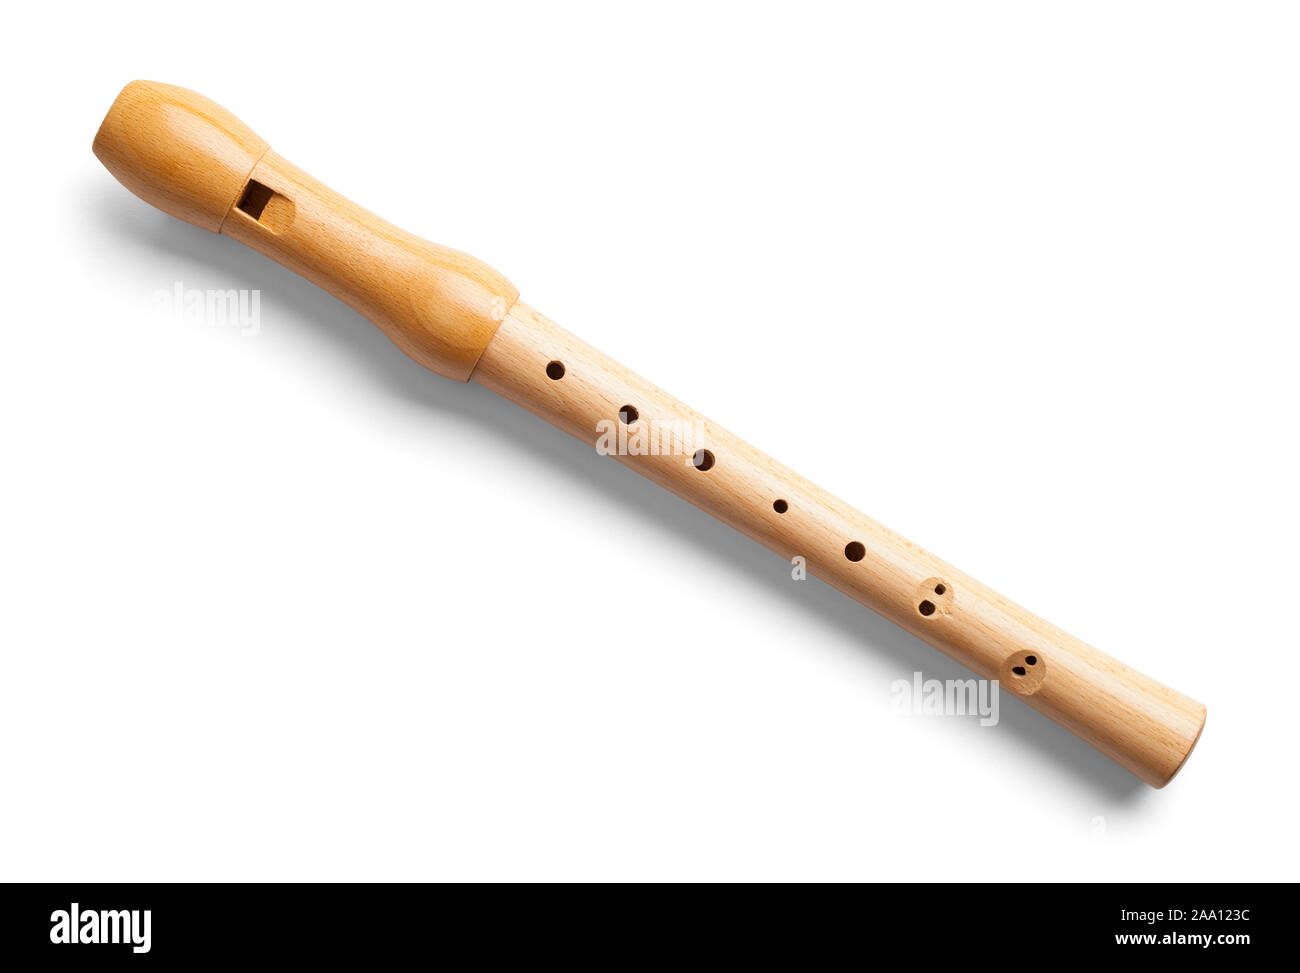 Wood Musical Recorder Isolated on White Background. Stock Photo